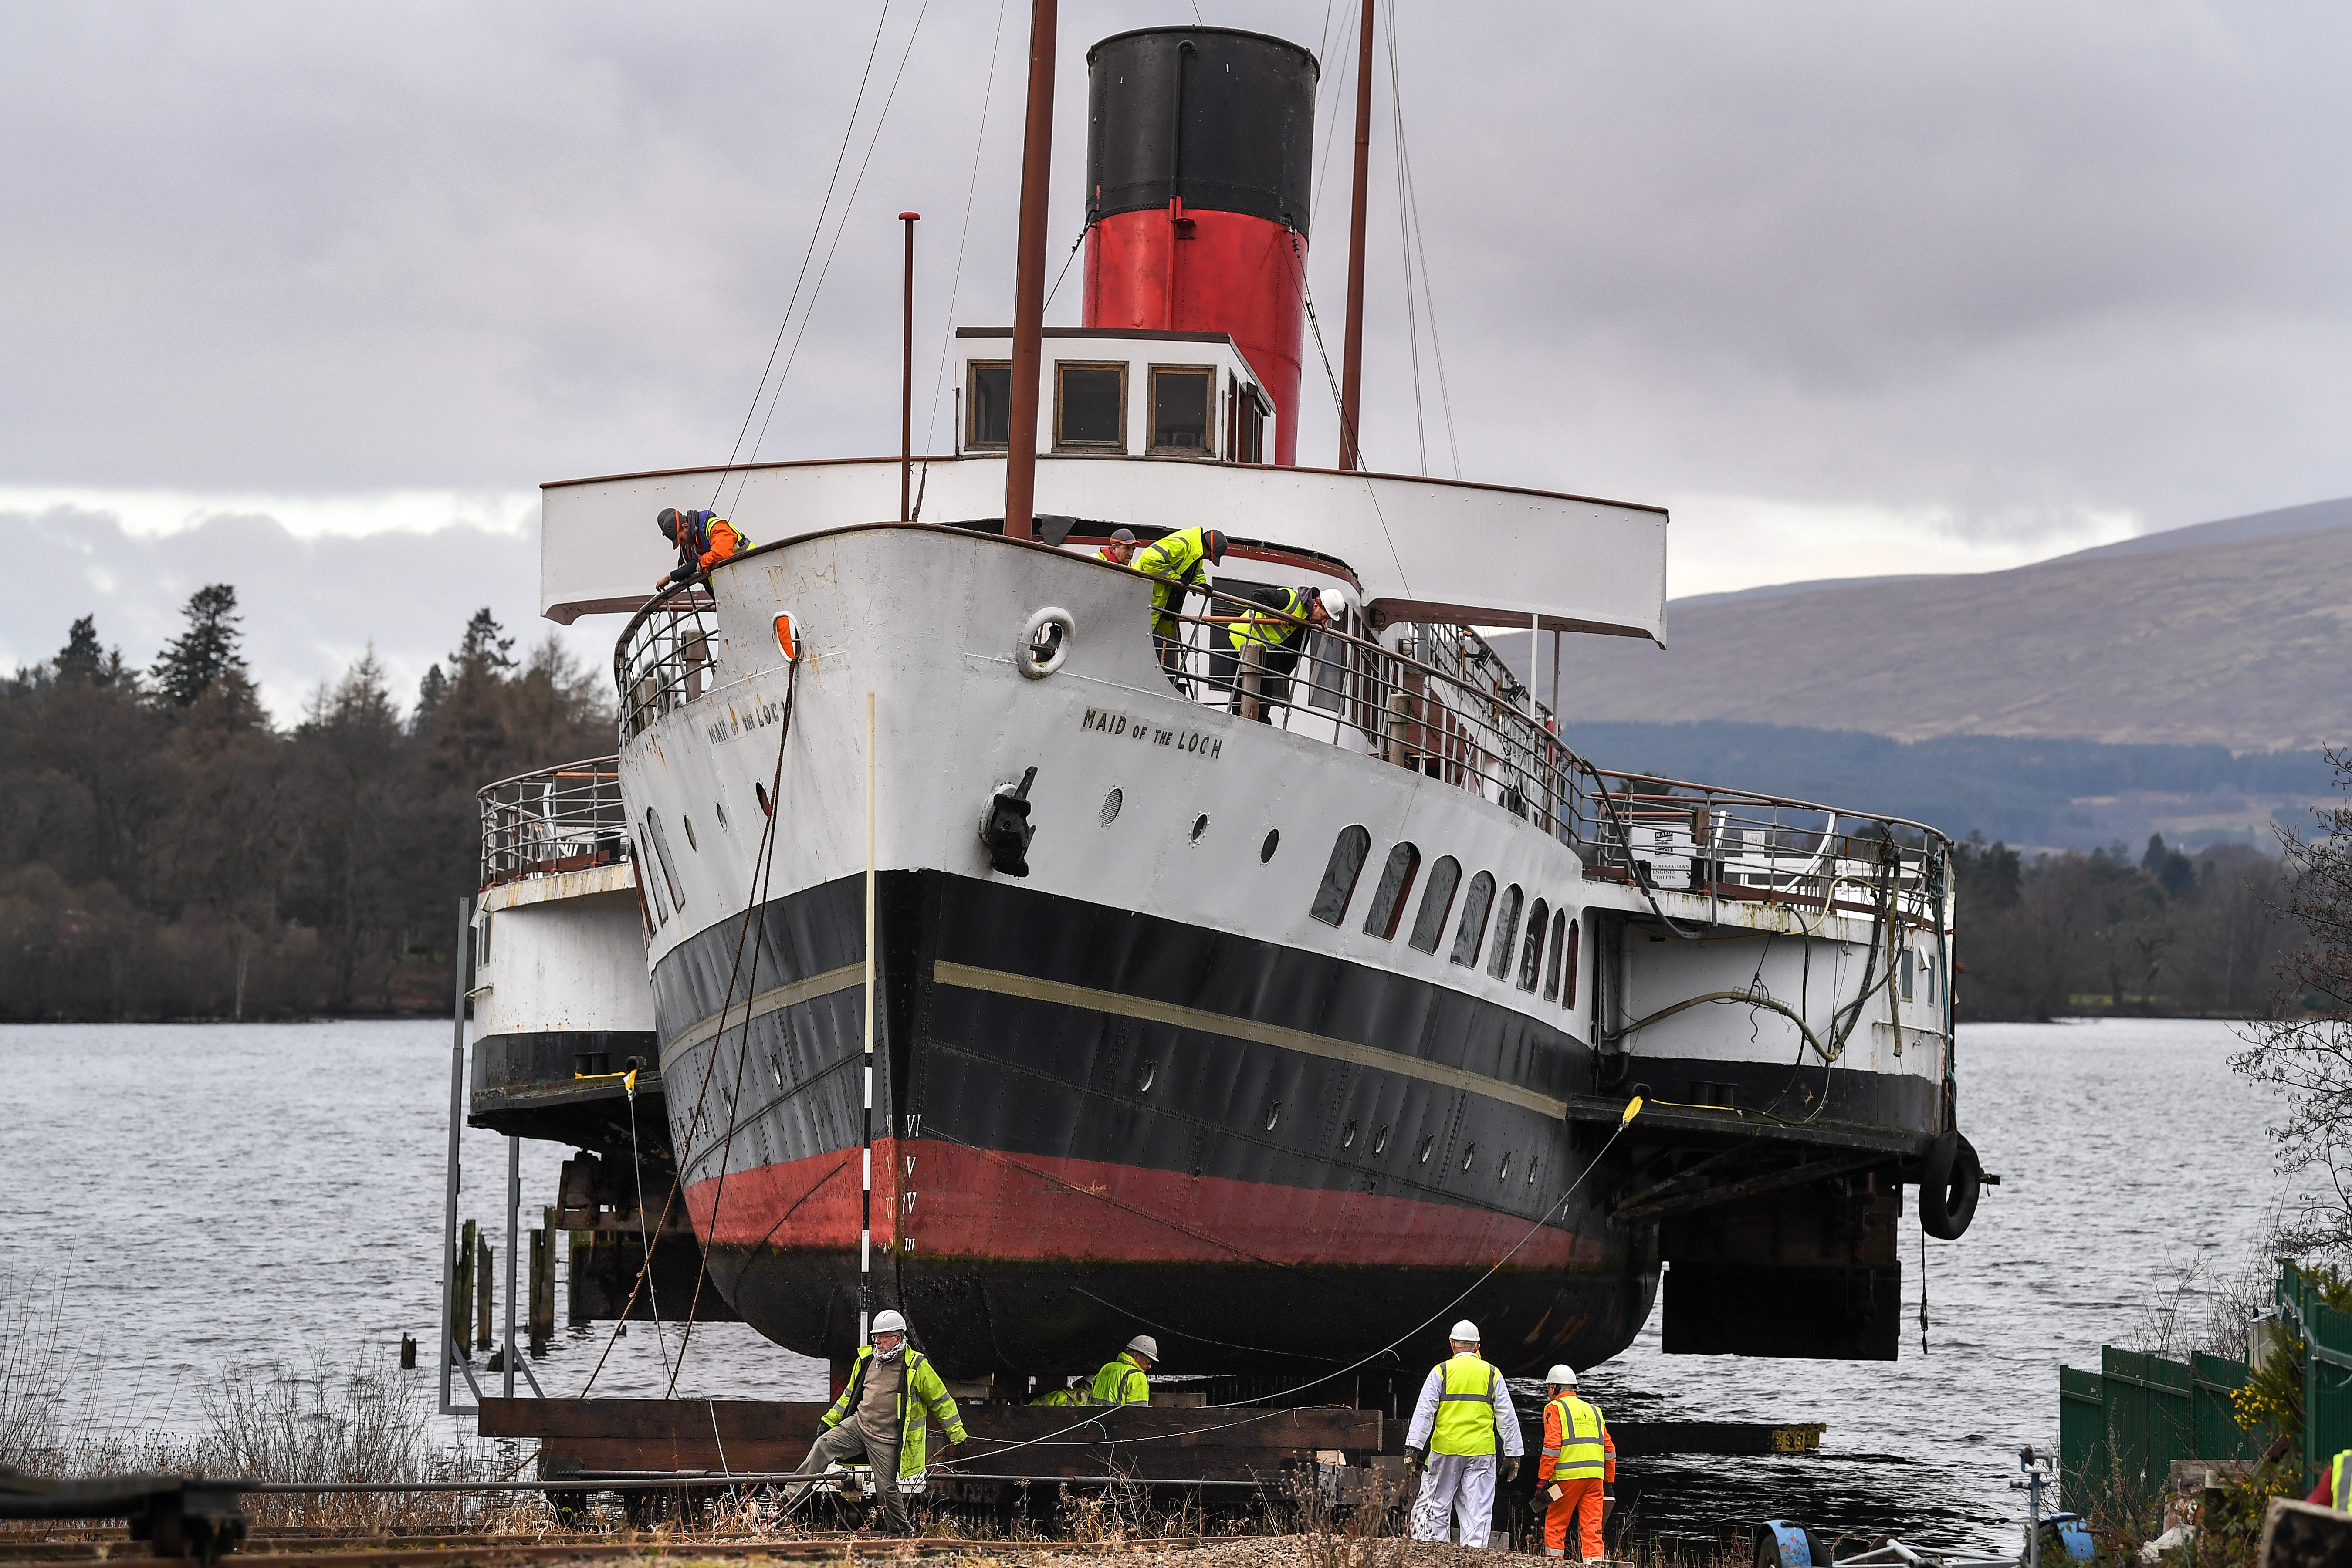 Maid of the Loch being pulled out of the water (Jeff J Mitchell/Getty Images)